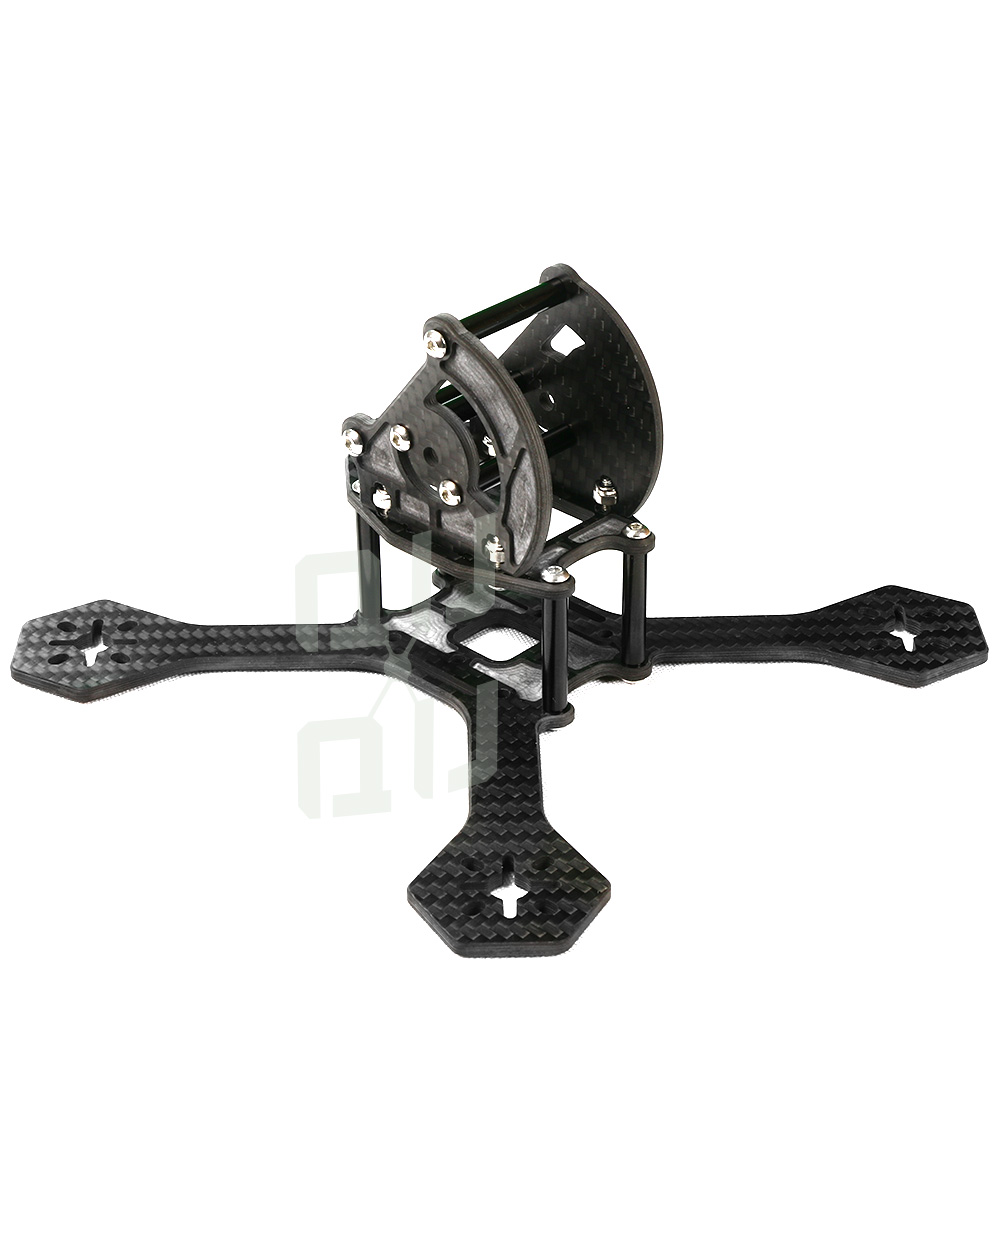 QQ166 4" Racing Drone X-style frame available from QuadQuestions.com right side view